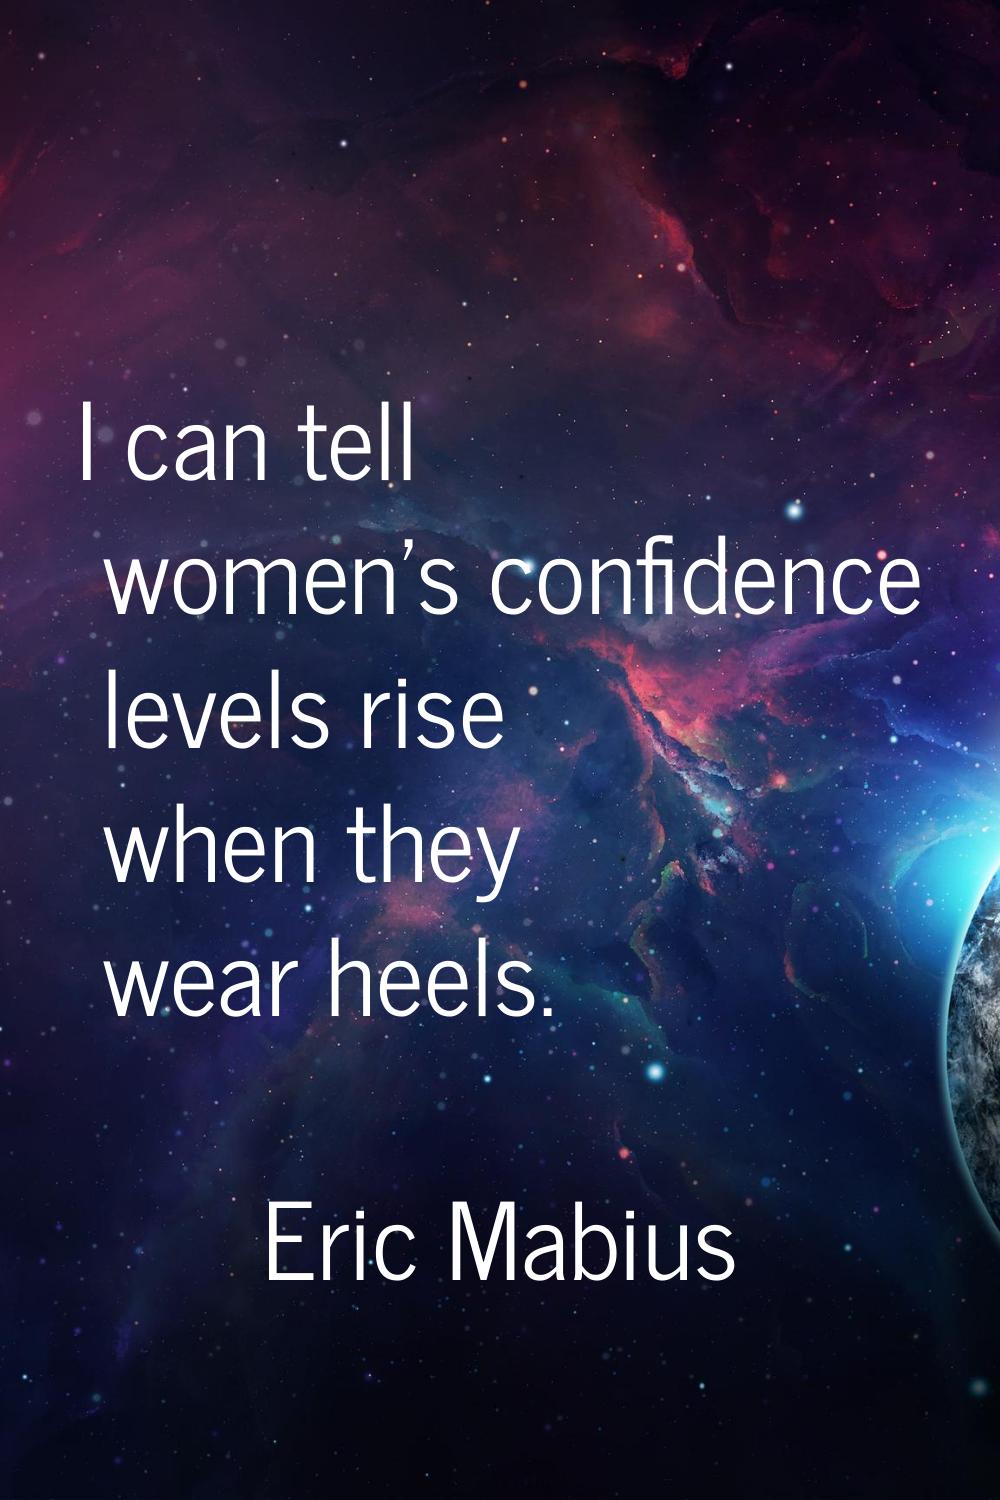 I can tell women's confidence levels rise when they wear heels.